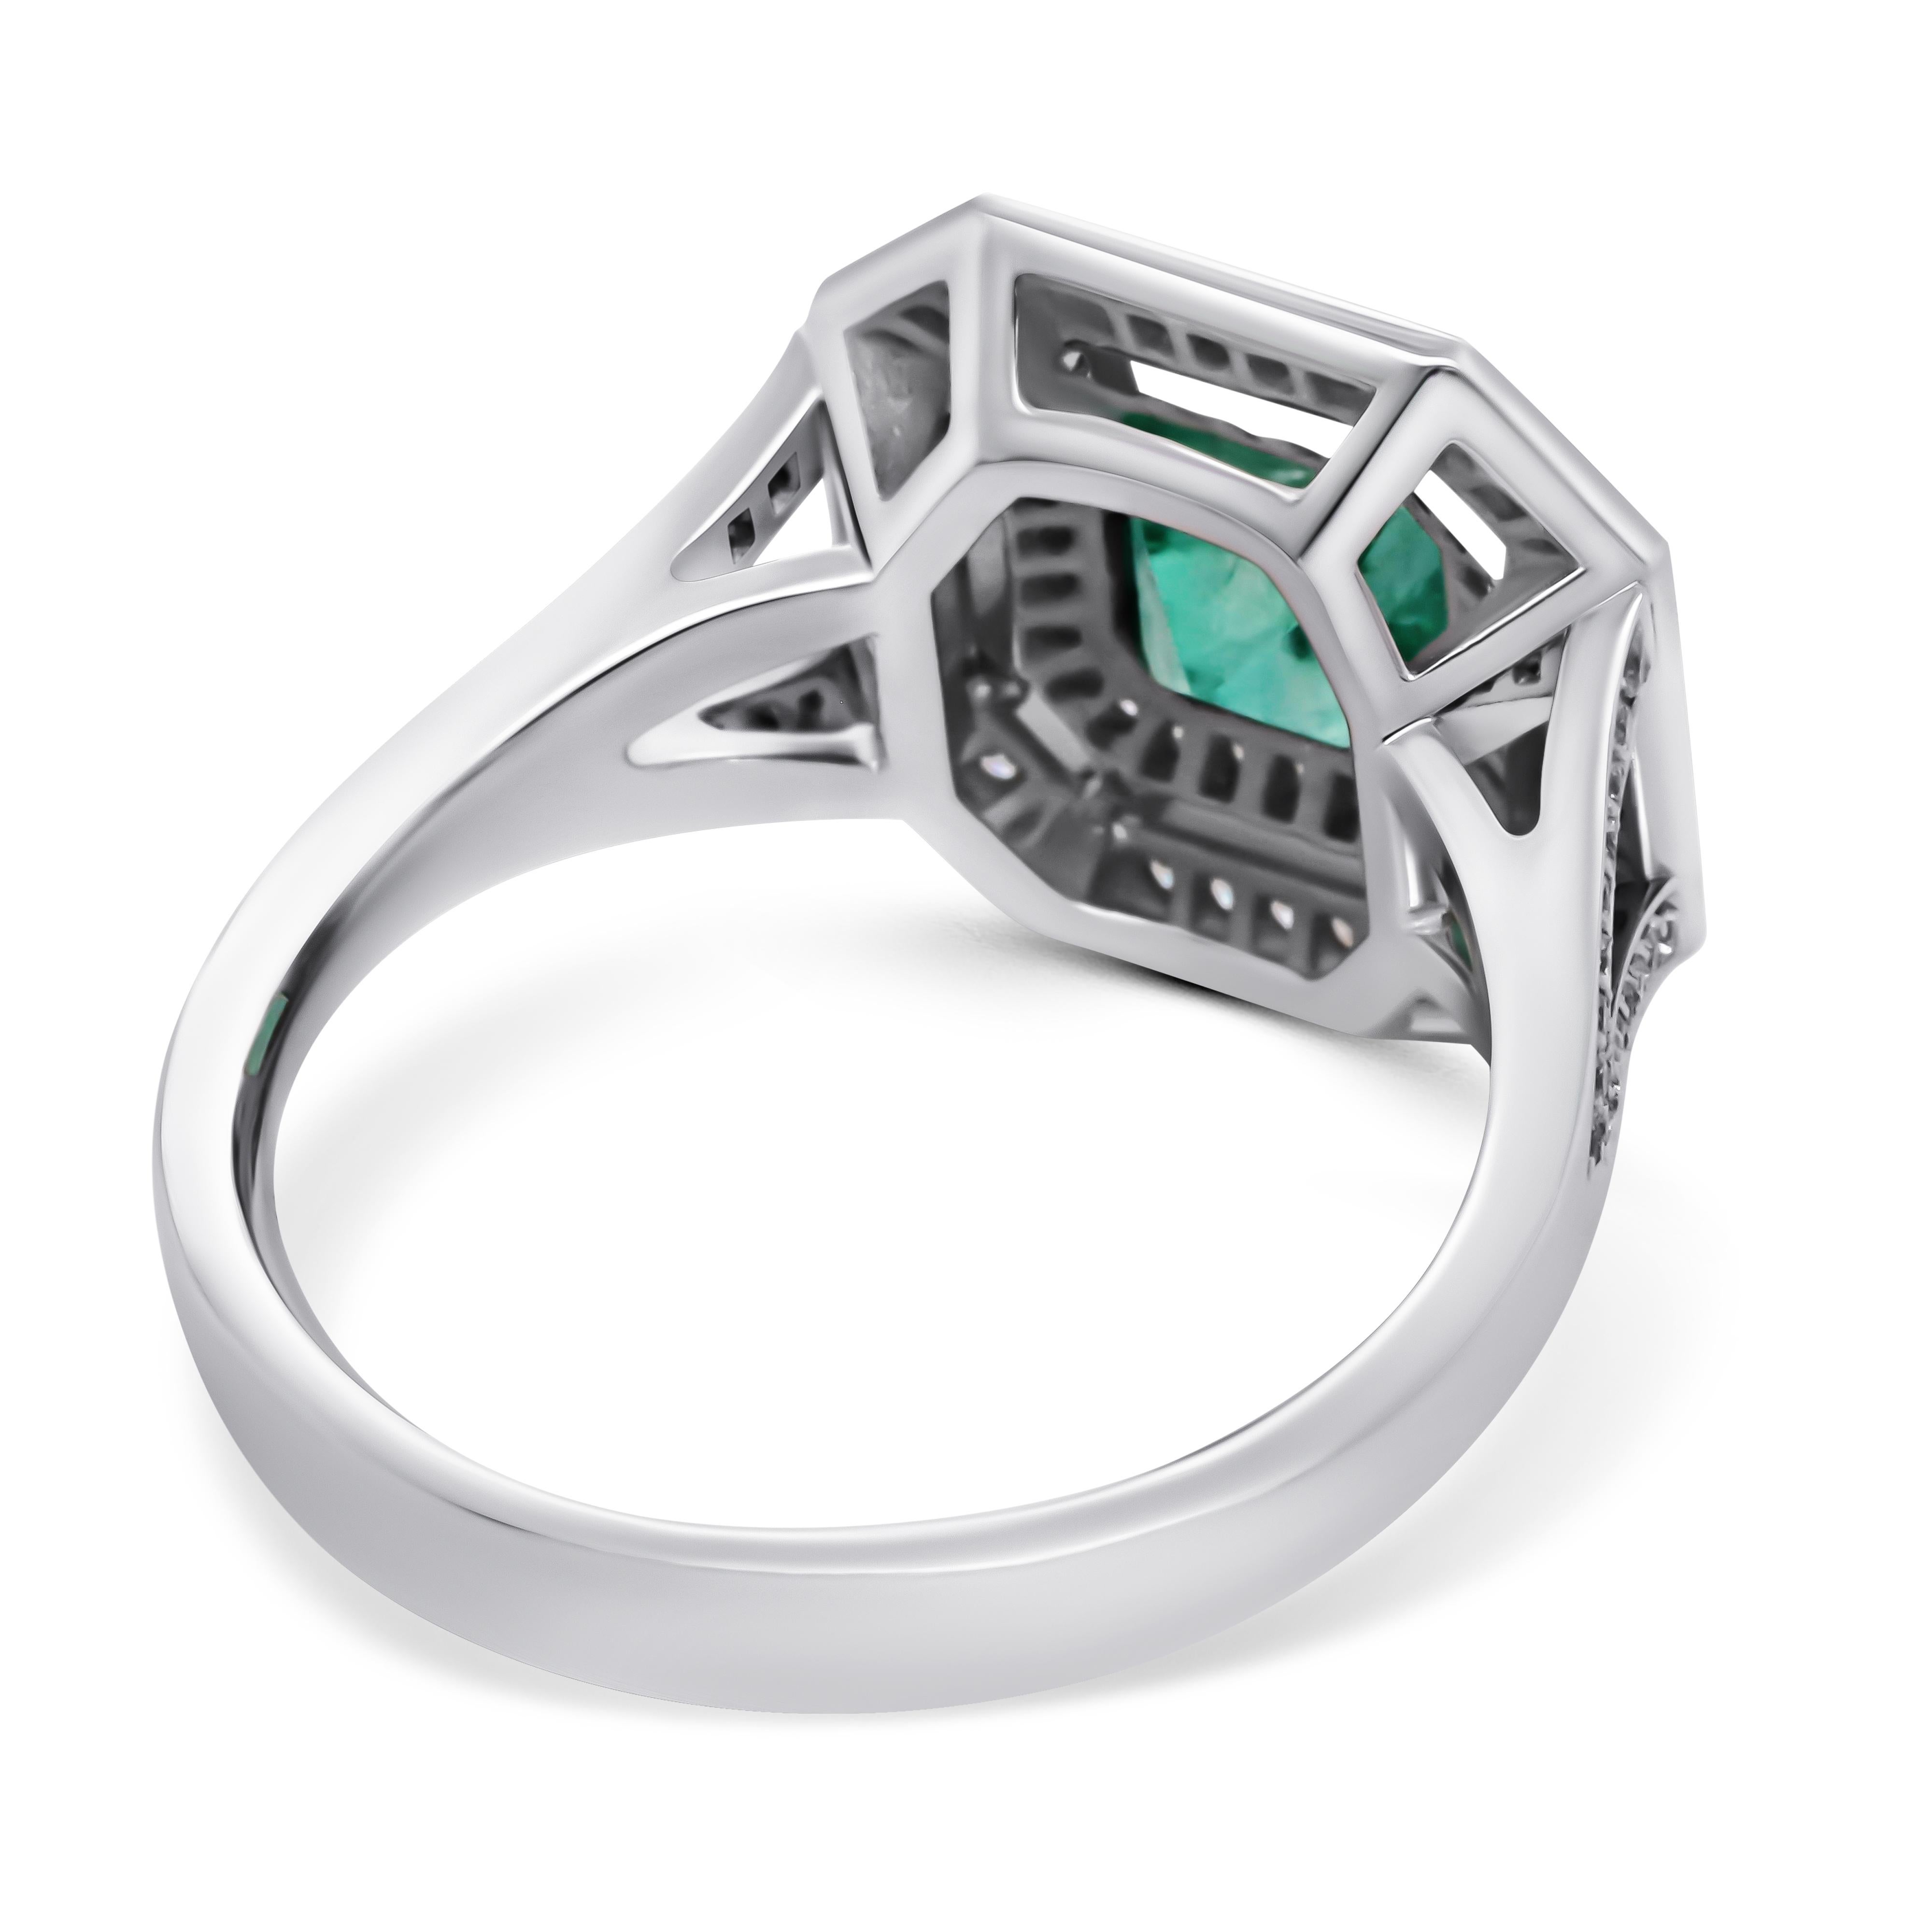 Classic 18k White Gold Ring featuring 0.96 ct Russian Emerald surrounded by White Diamonds totaling 0.35 ctw. 
The traditional yet sophisticated design is truly timeless.

Russia became an important source of emerald in 1830 when it was first